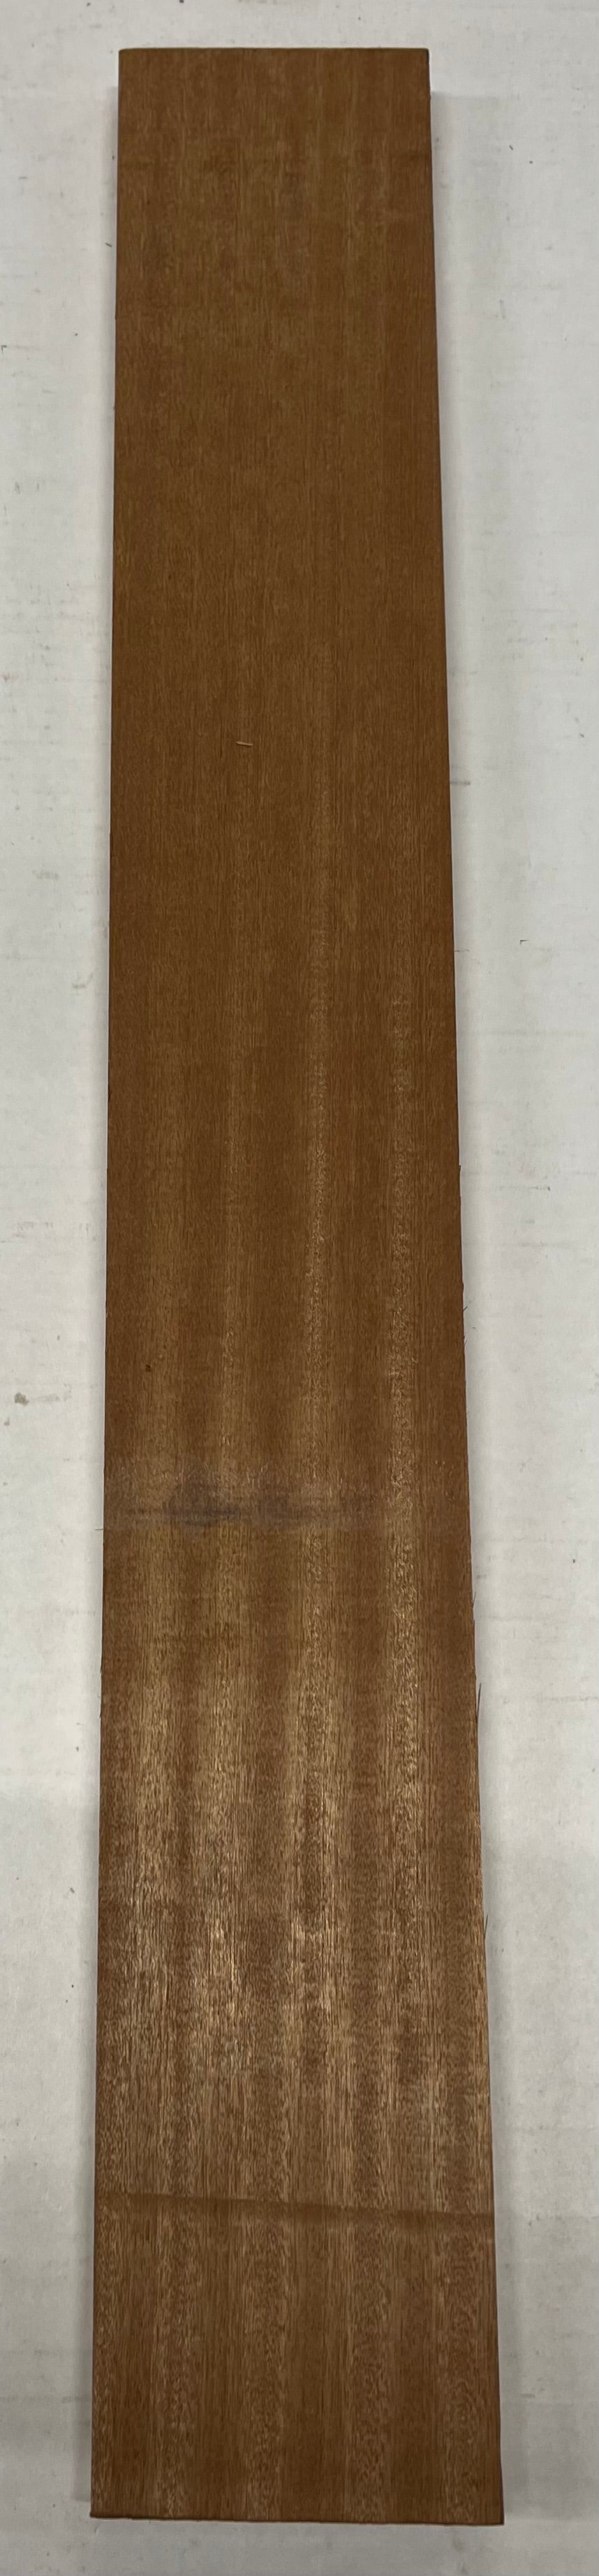 Sapele Thin Stock Lumber Board Square Wood Blank 35&quot;x4-3/4&quot;x7/8&quot;  